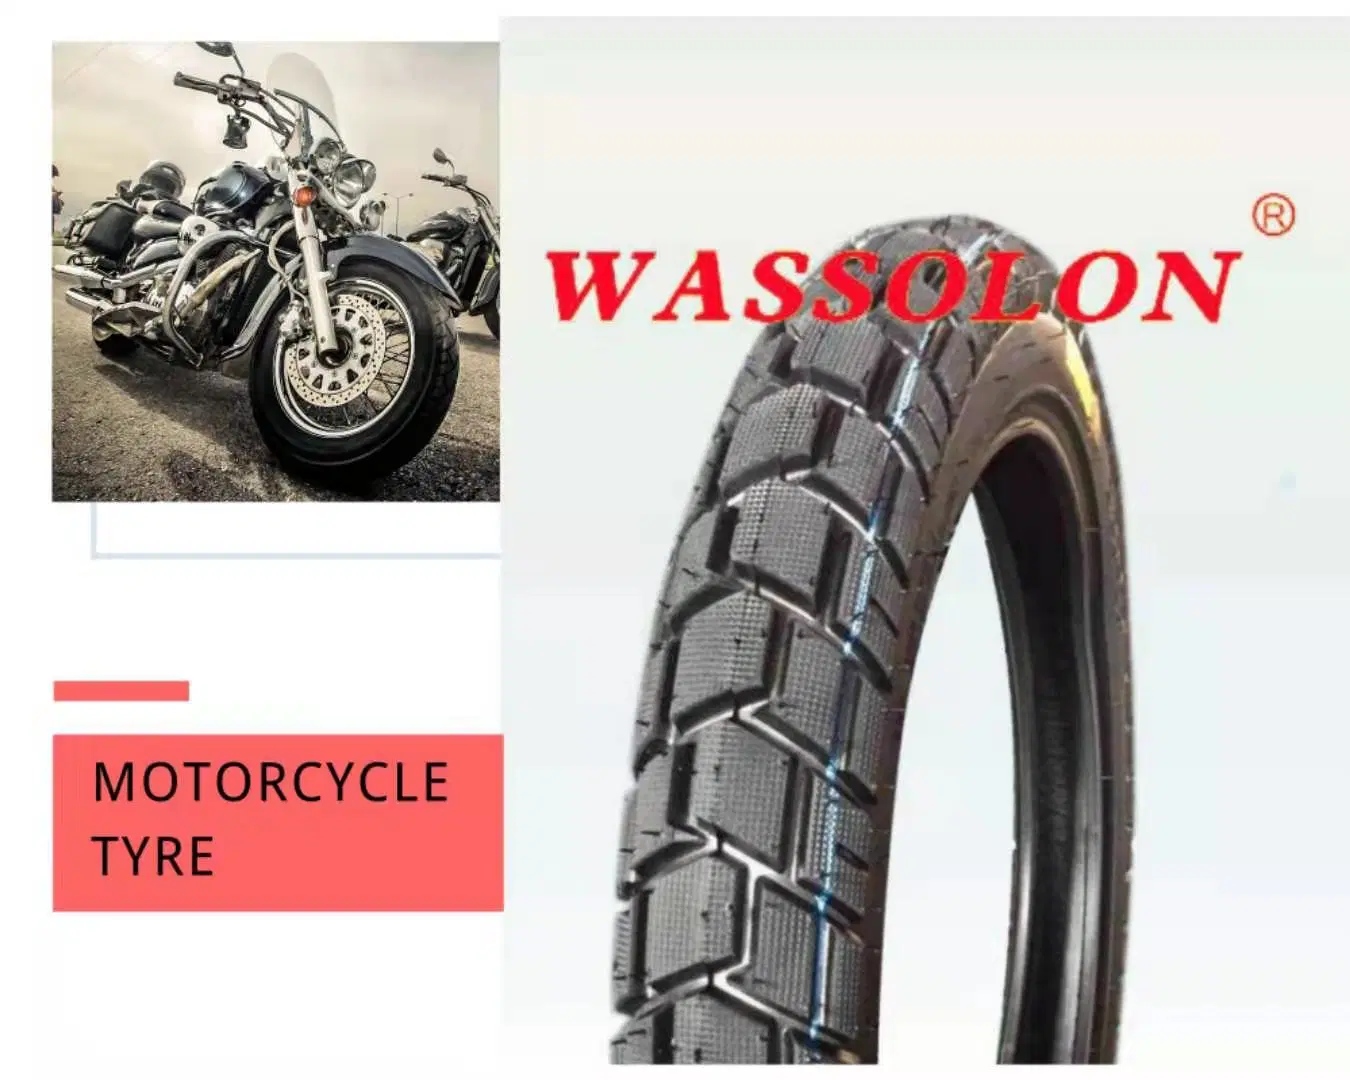 off Road Auto Parts Stab Resisitance Tubeless Rubber Wheel Motorcycle/Truck/Car/Radial/Bicycle/OTR Tyre 8pr Nylon Tire for Motorbike